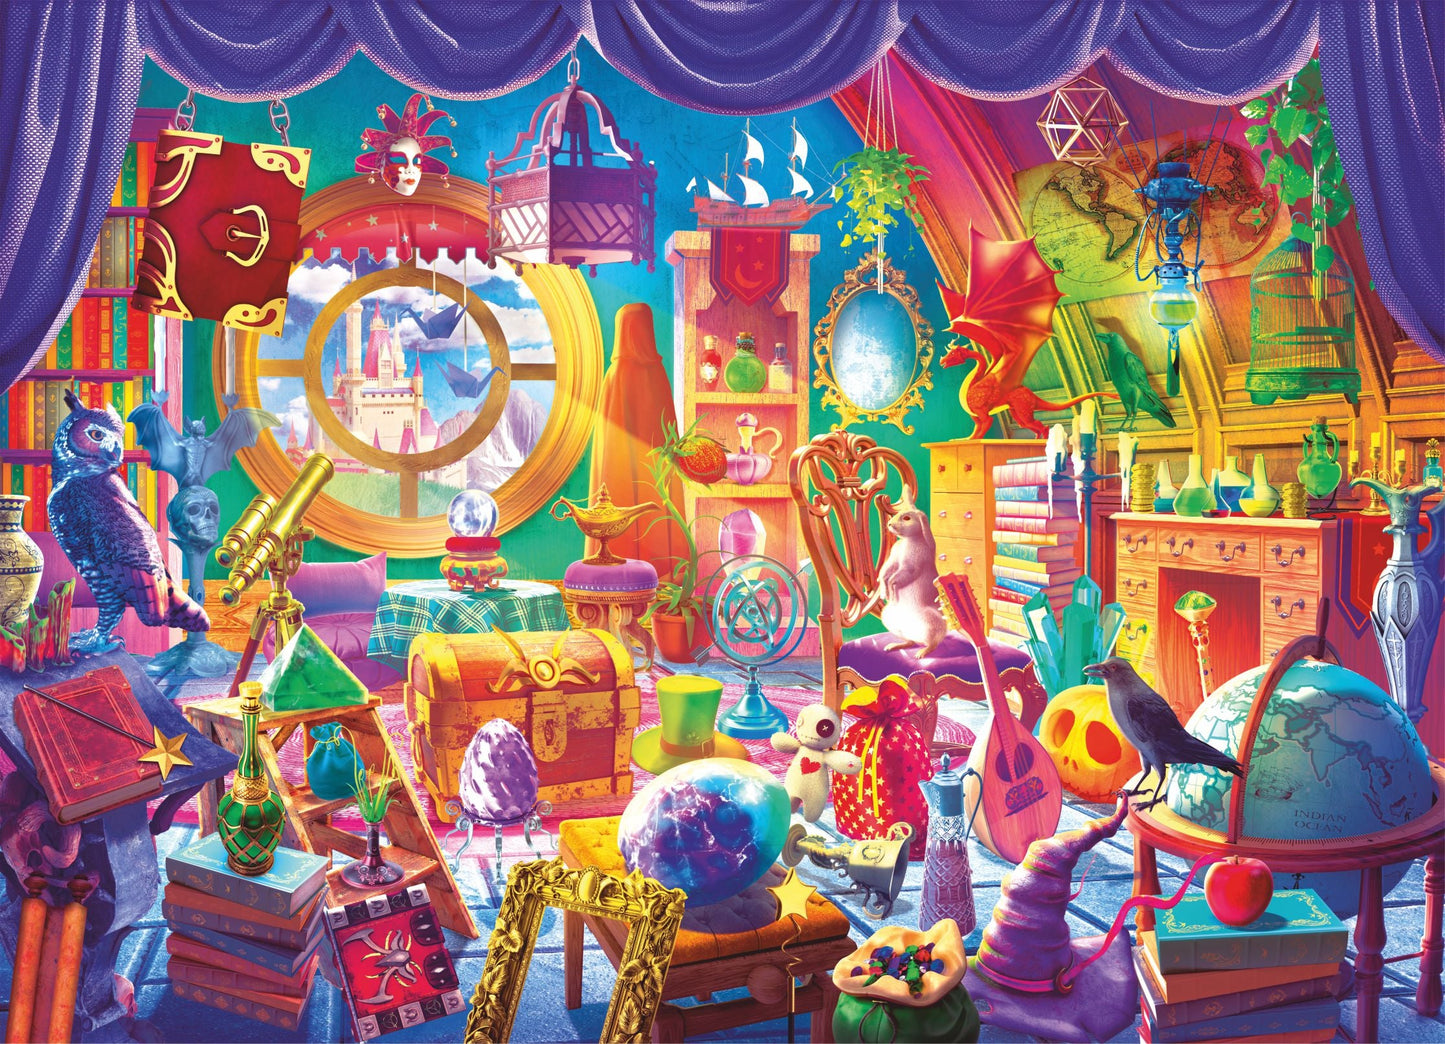 Magic Room Jigsaw Puzzles 1000 Piece by Brain Tree Games - Jigsaw Puzzles